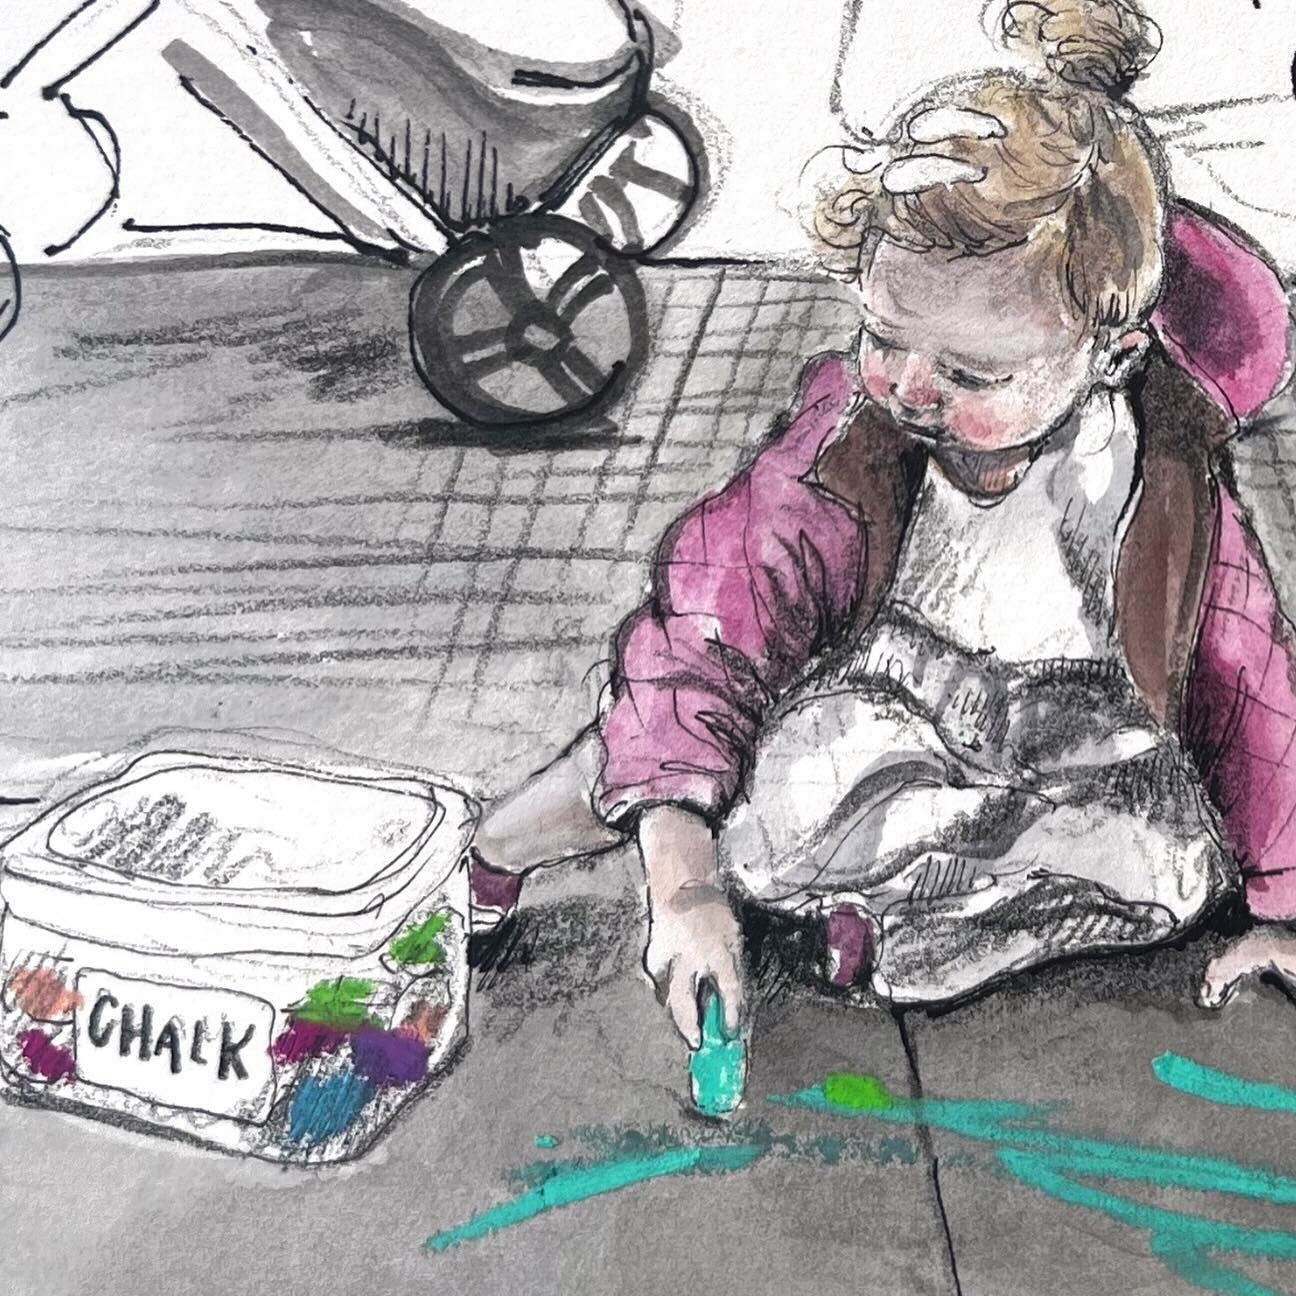 Playing with different materials today, while drawing this little girl. She was playing on the sidewalk in front of the coffee shop where I like to sit in the window. 

Pencil, ink, inktense paint, and oil pastels.

#drawyourworld #drawyourworldwiths